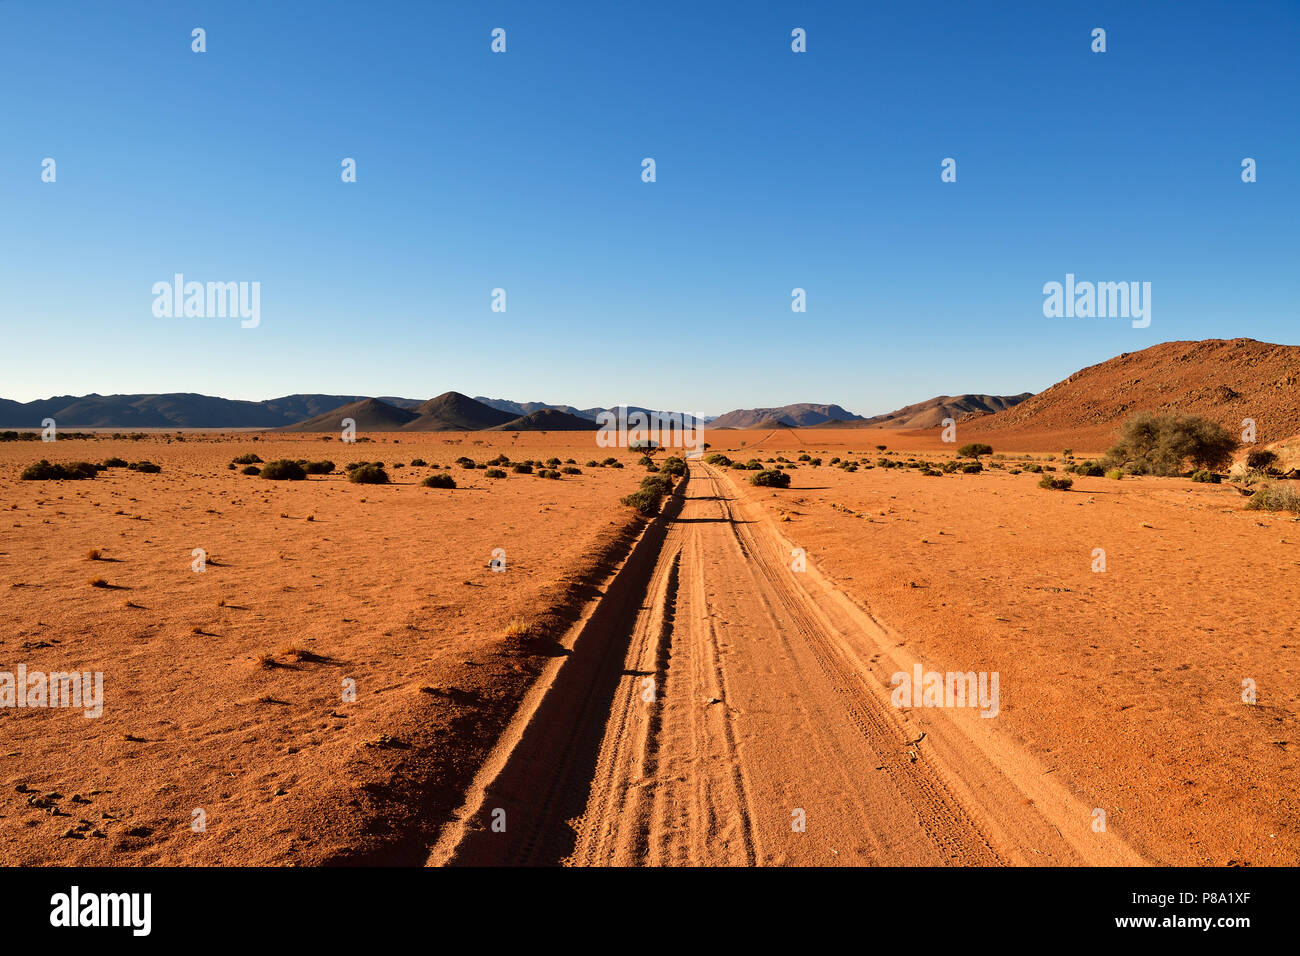 Sandtrack in the soft evening light leads through the steppe with mountains on the horizon, Tiras mountains, Namibia Stock Photo